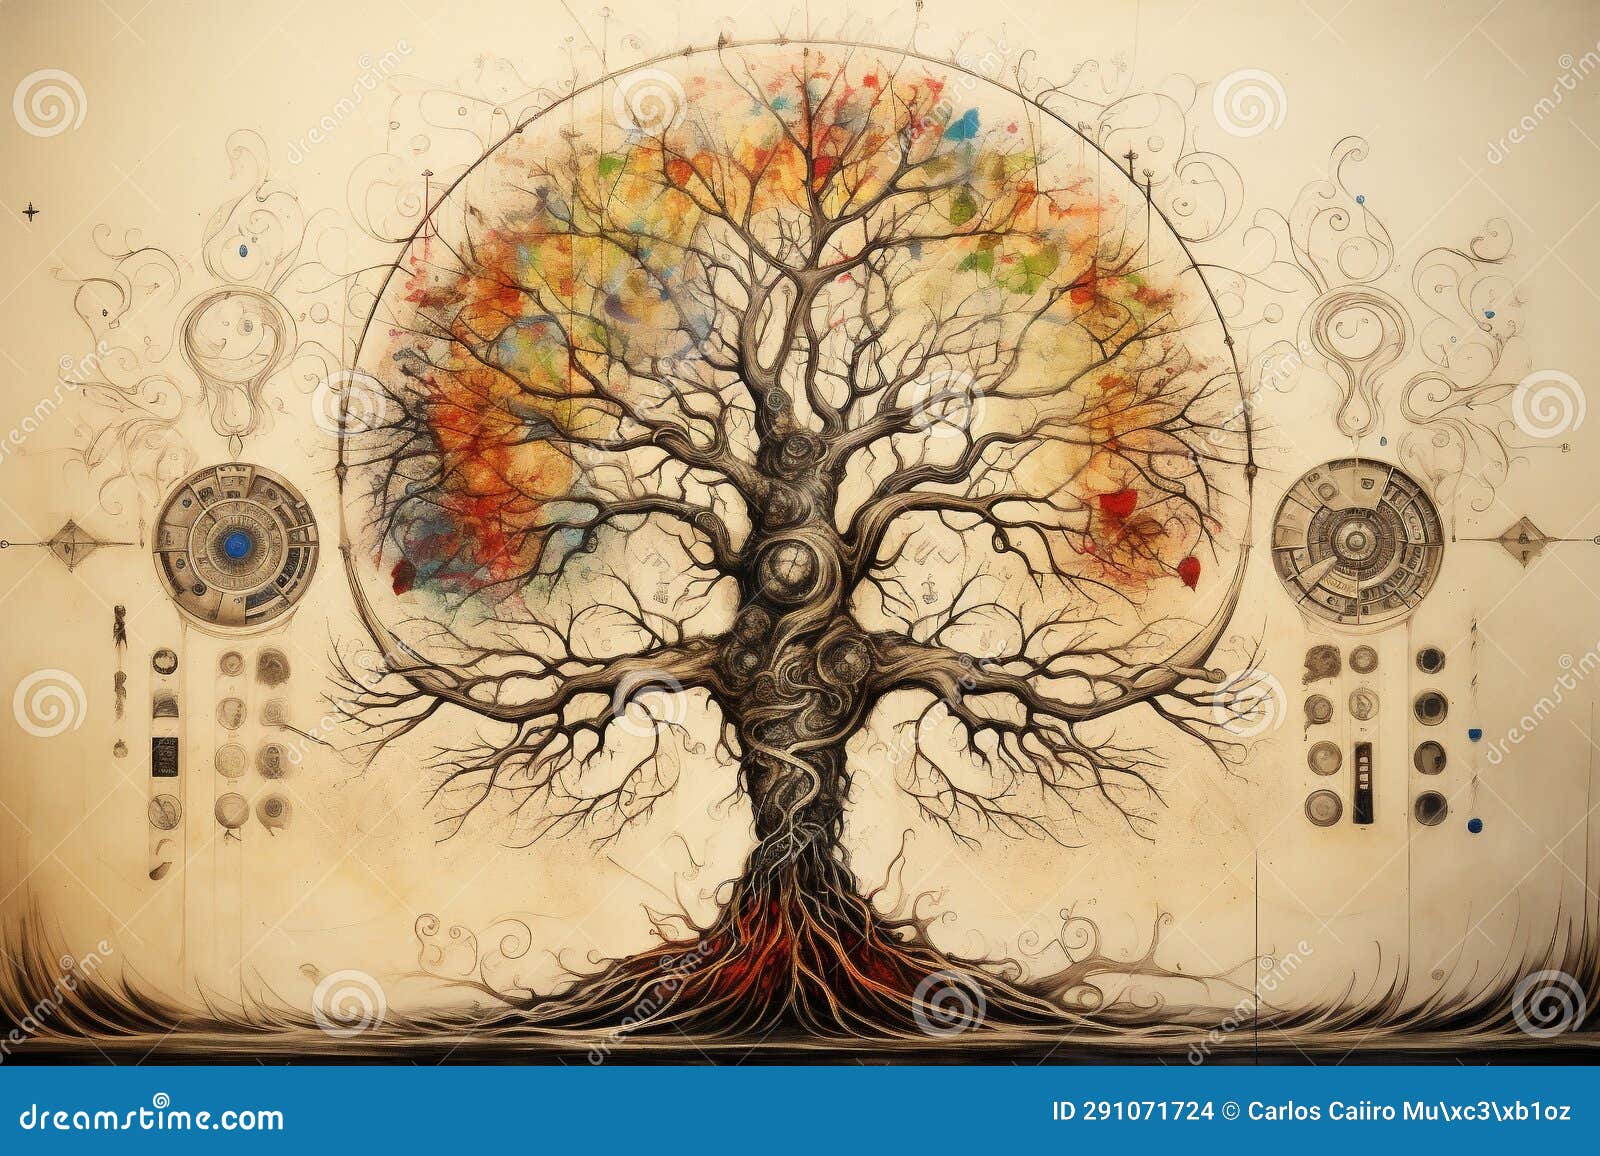 ancient drawing of the tree of life